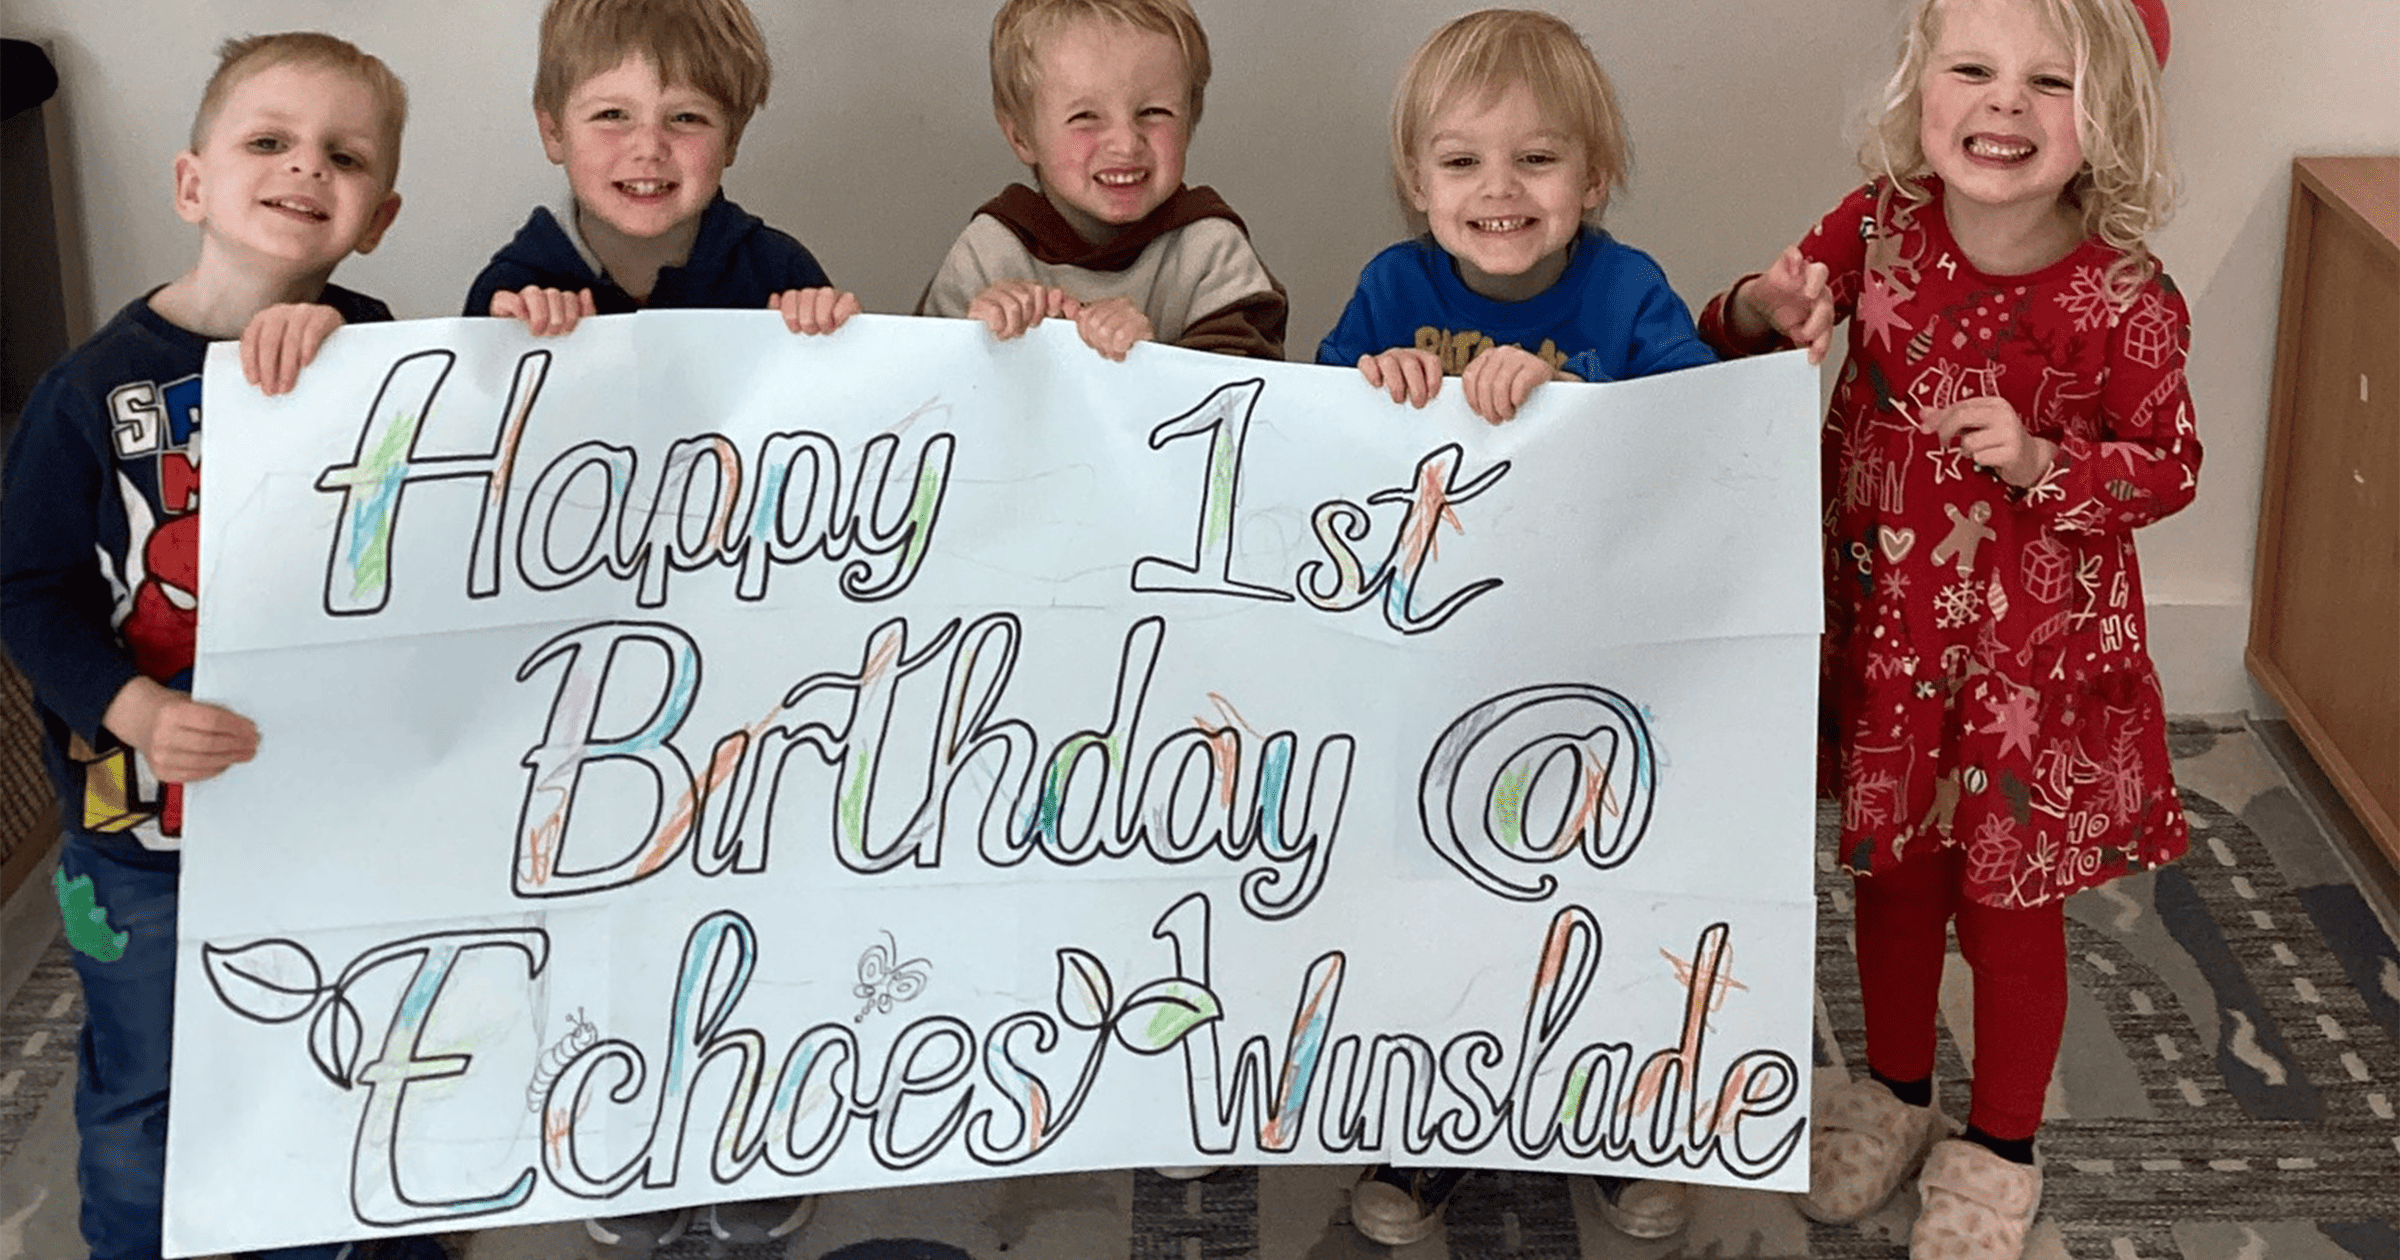 Children from Echoes Nursery hold a large happy 1 year at Winslade birthday banner up to the camera while smiling broadly